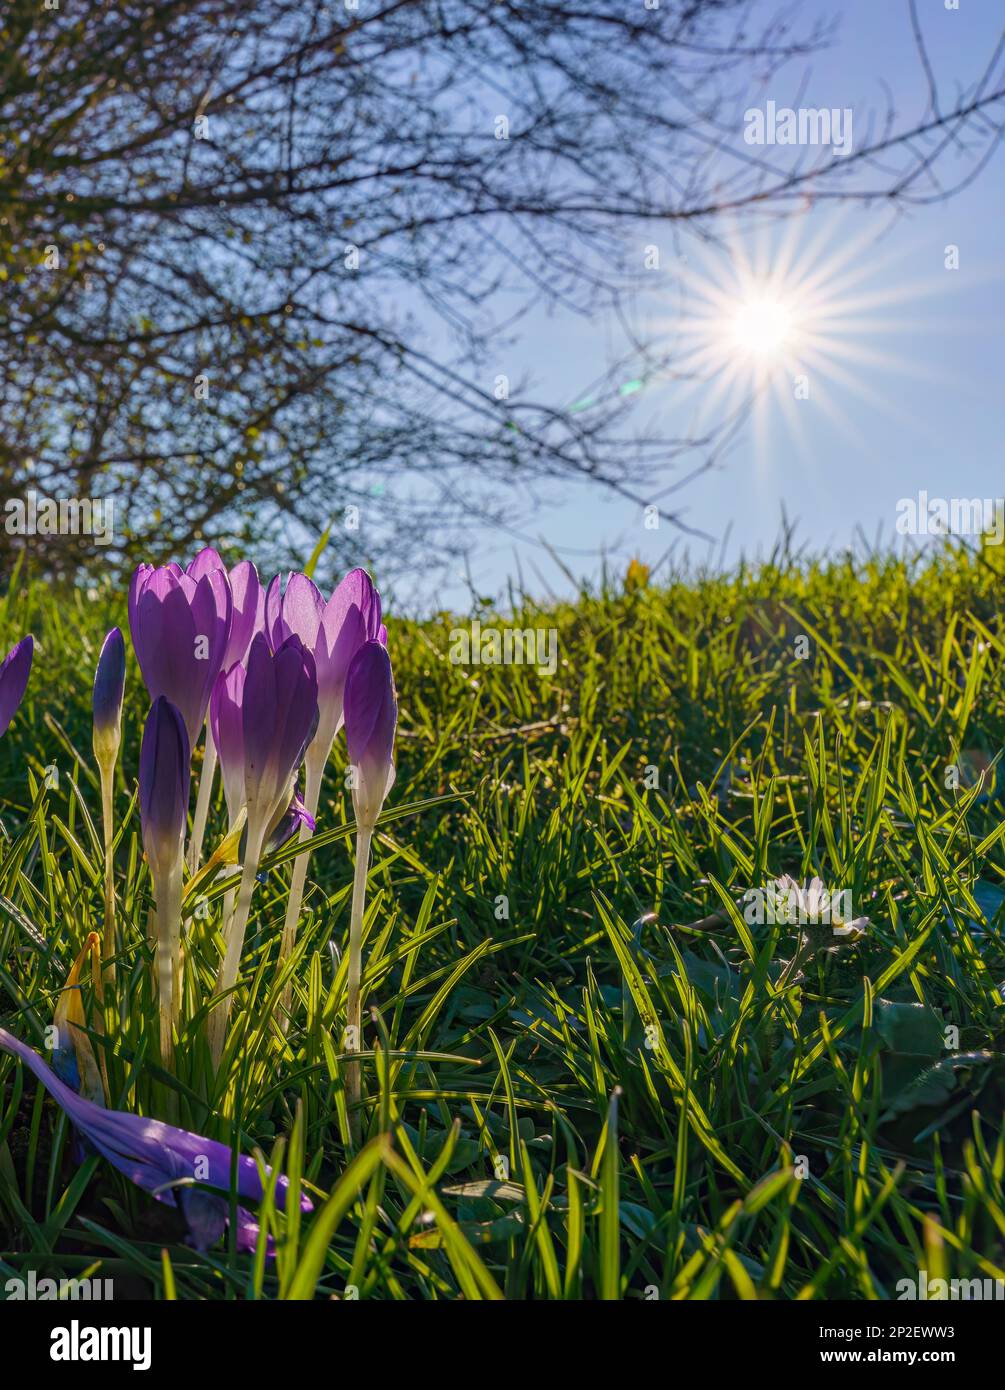 Blooming violet crocuses in early spring Stock Photo